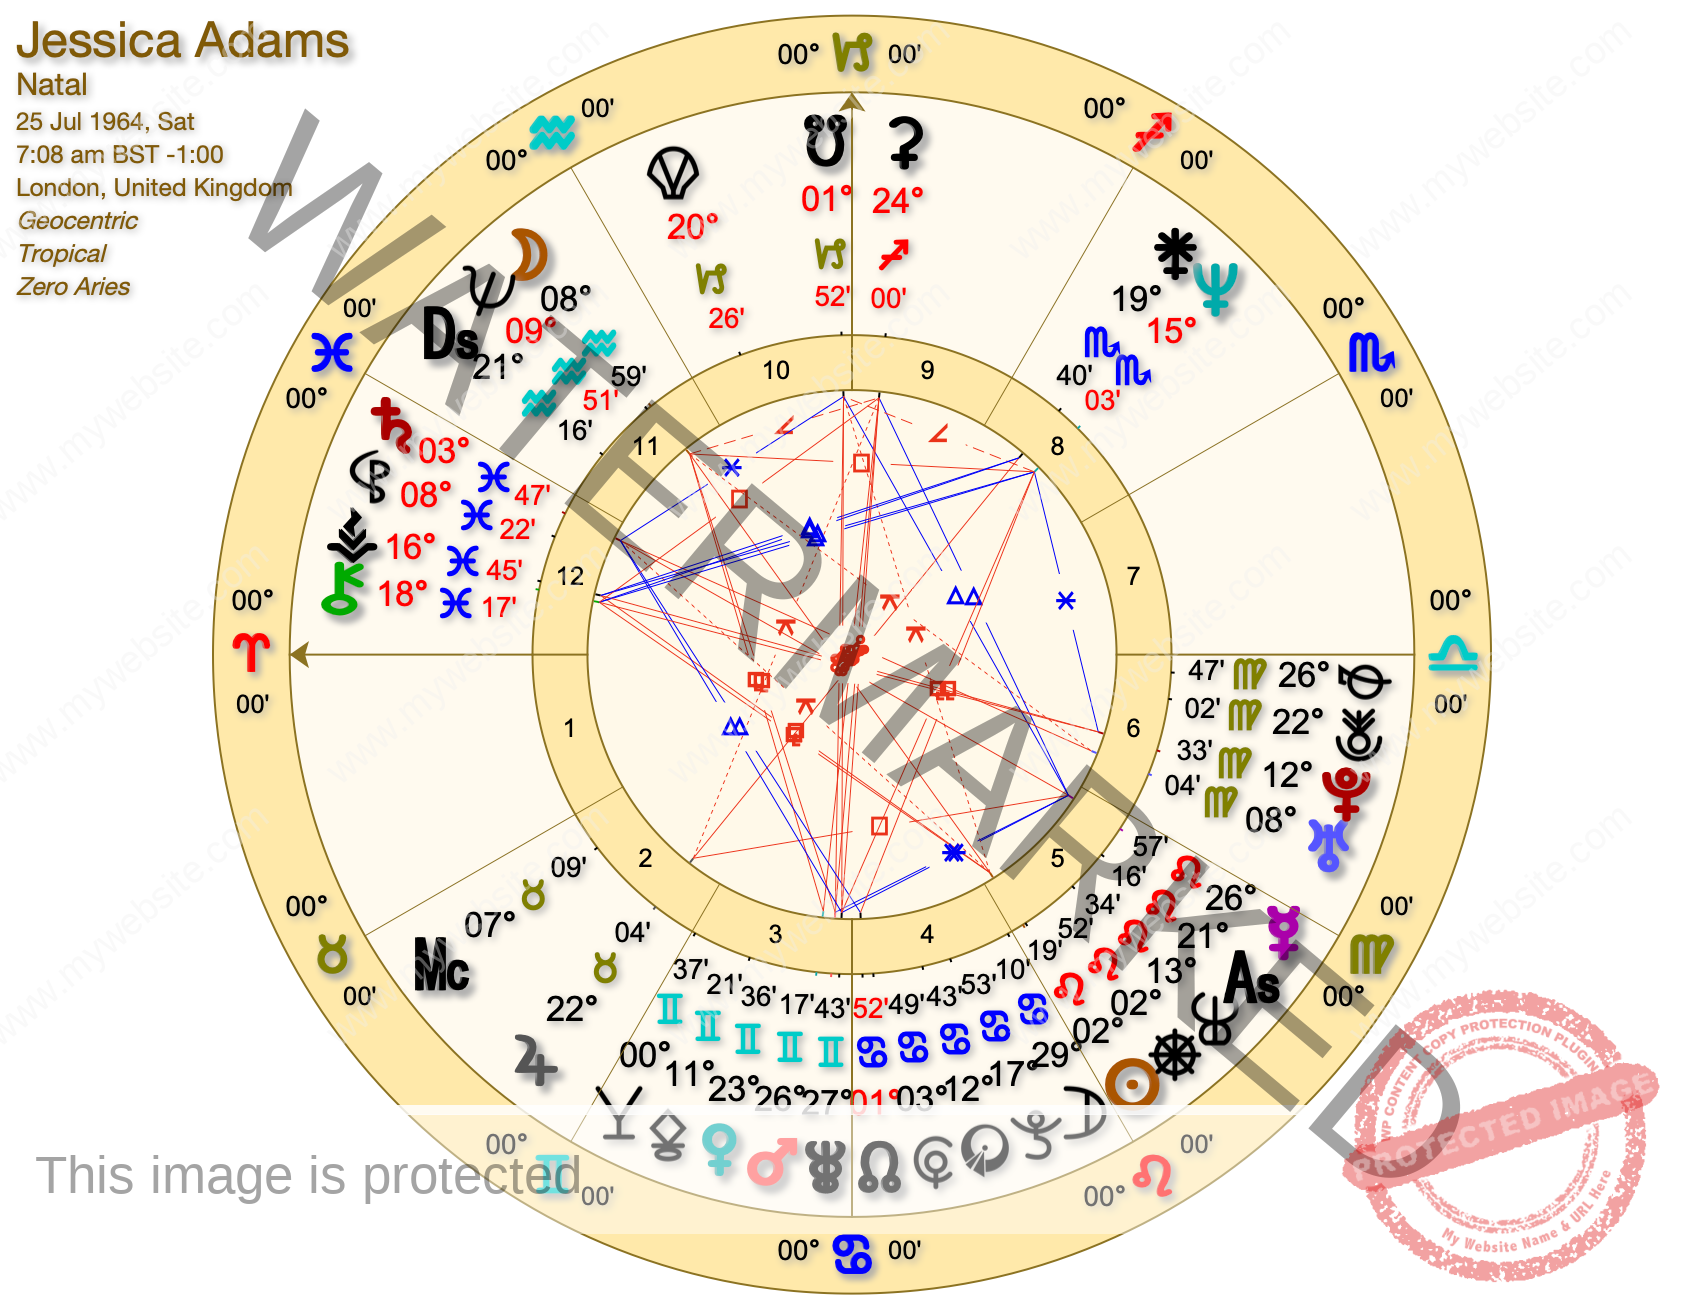 JESSICA ADAMS CHART - Chemistry and Compatibility in Astrology